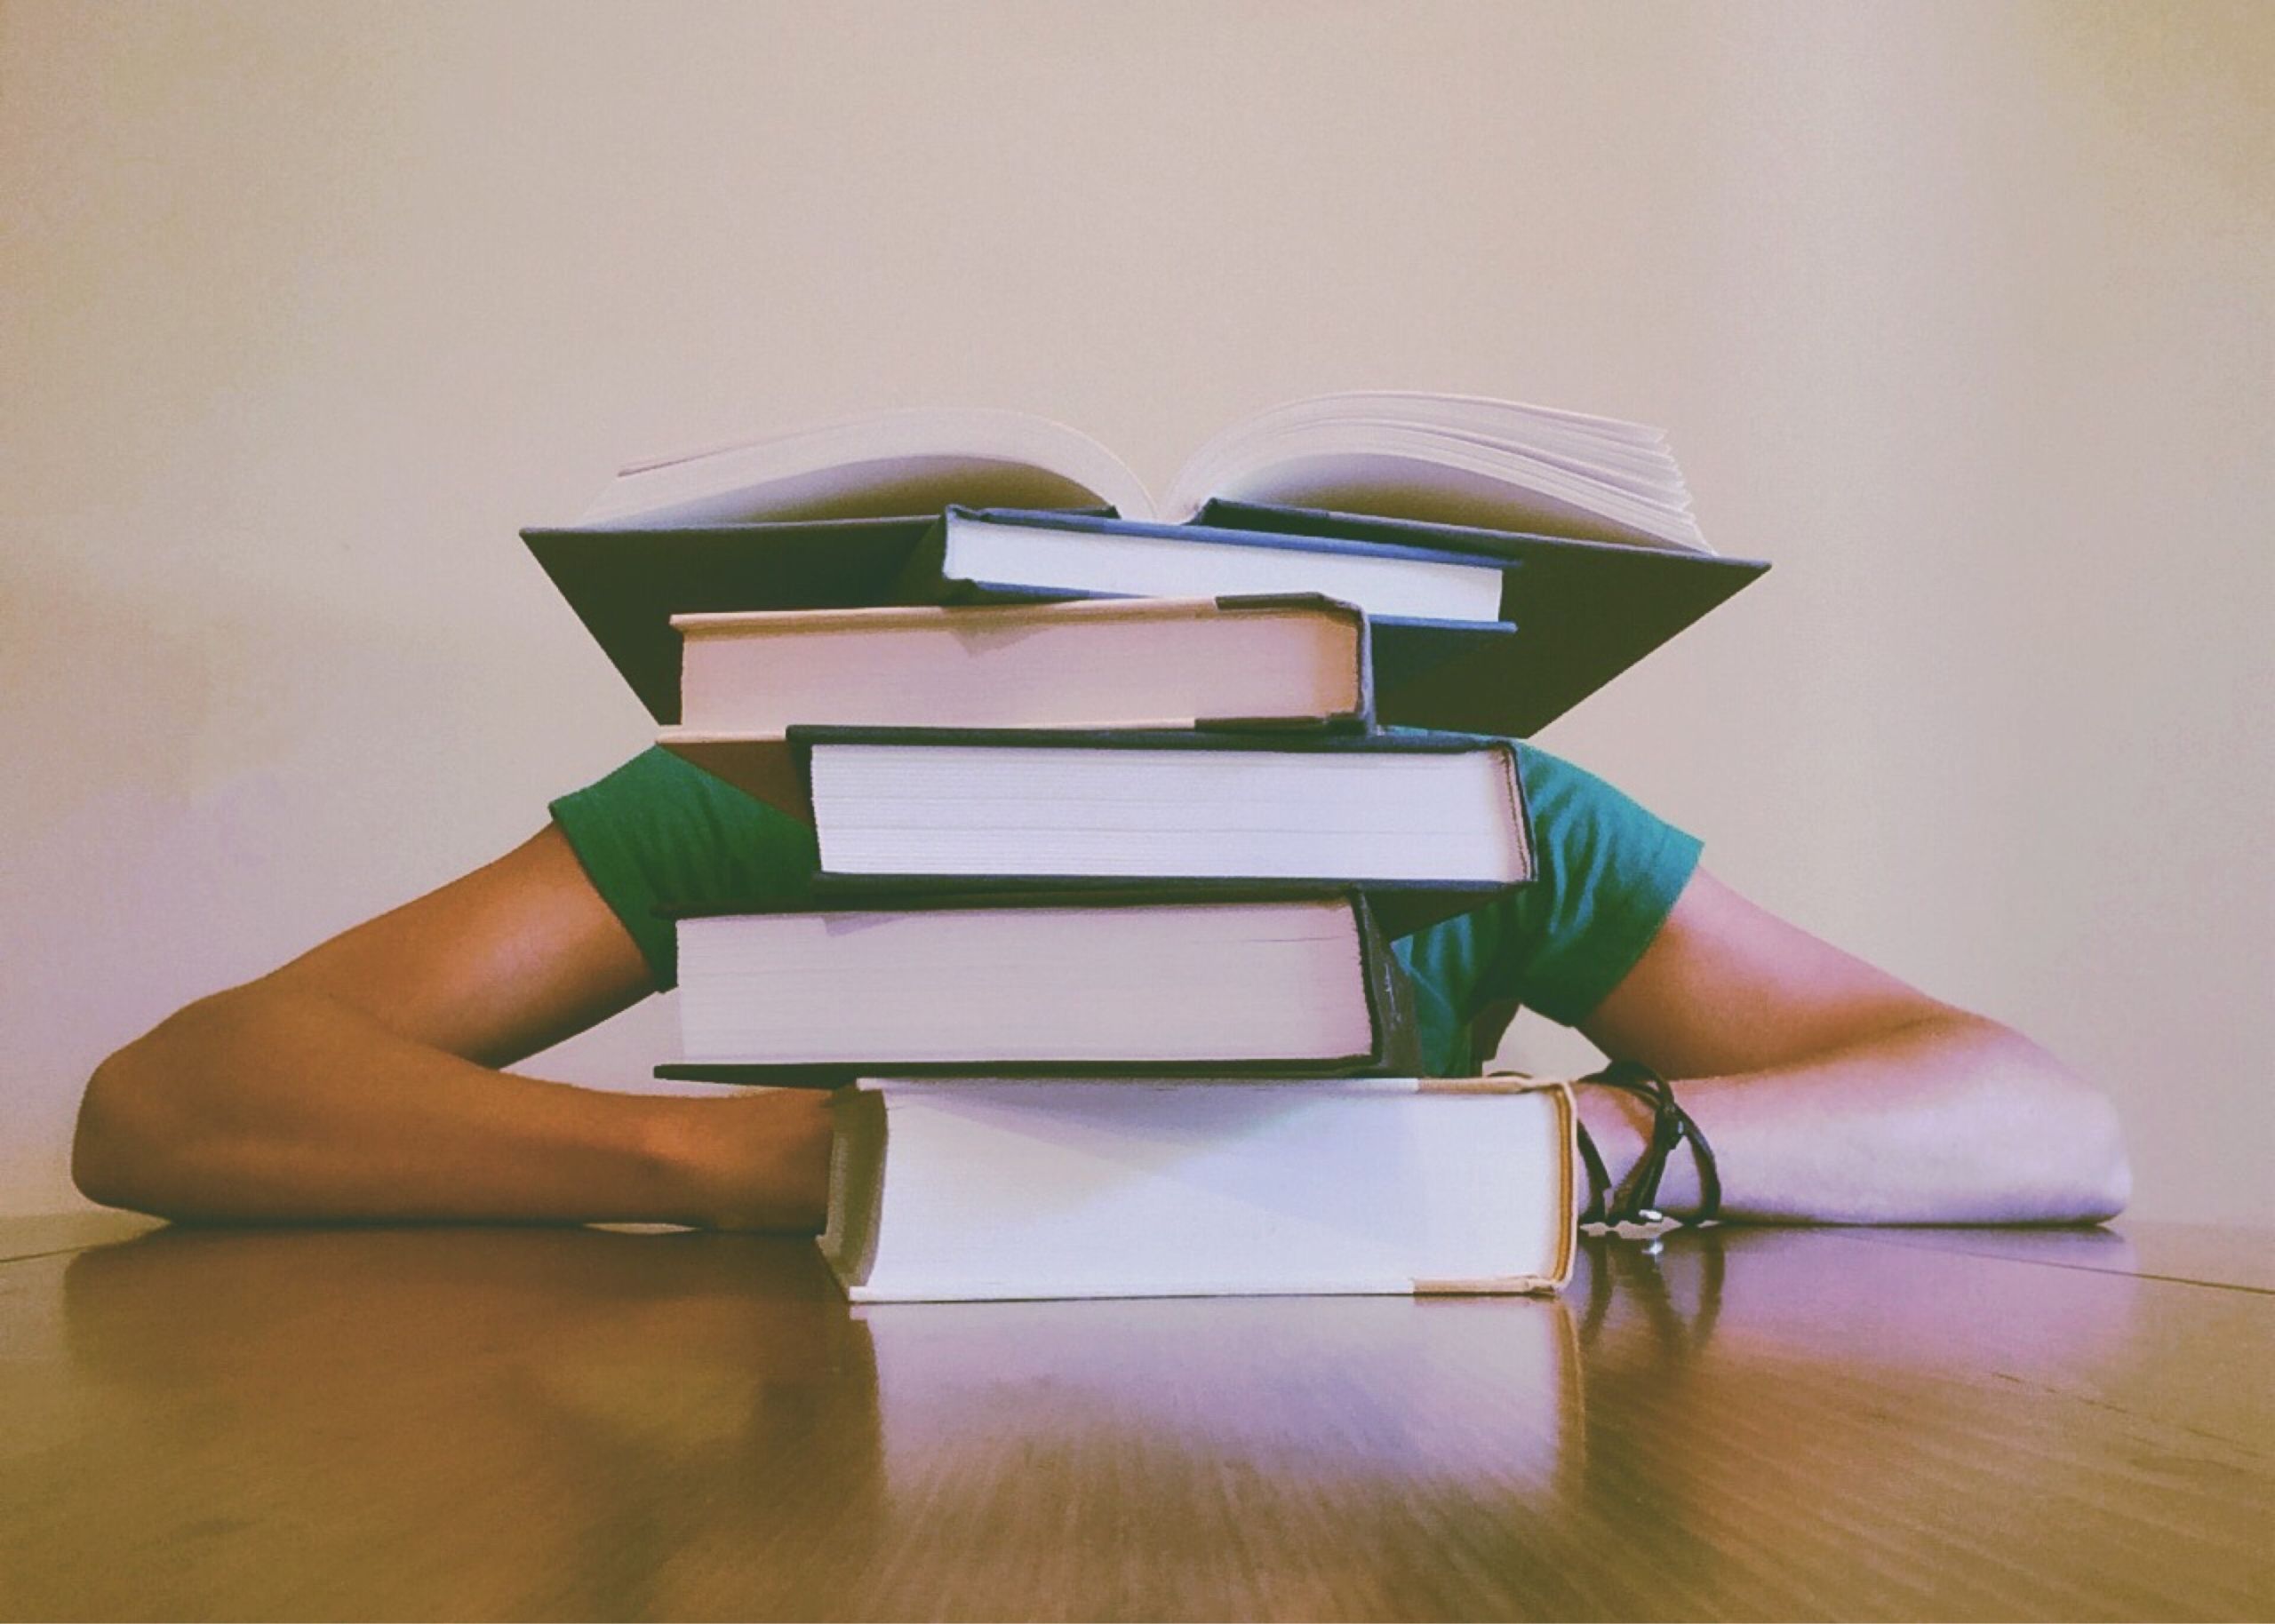 A student behind a stack of books with heavy workload. Photo by Pixabay from Pexels.